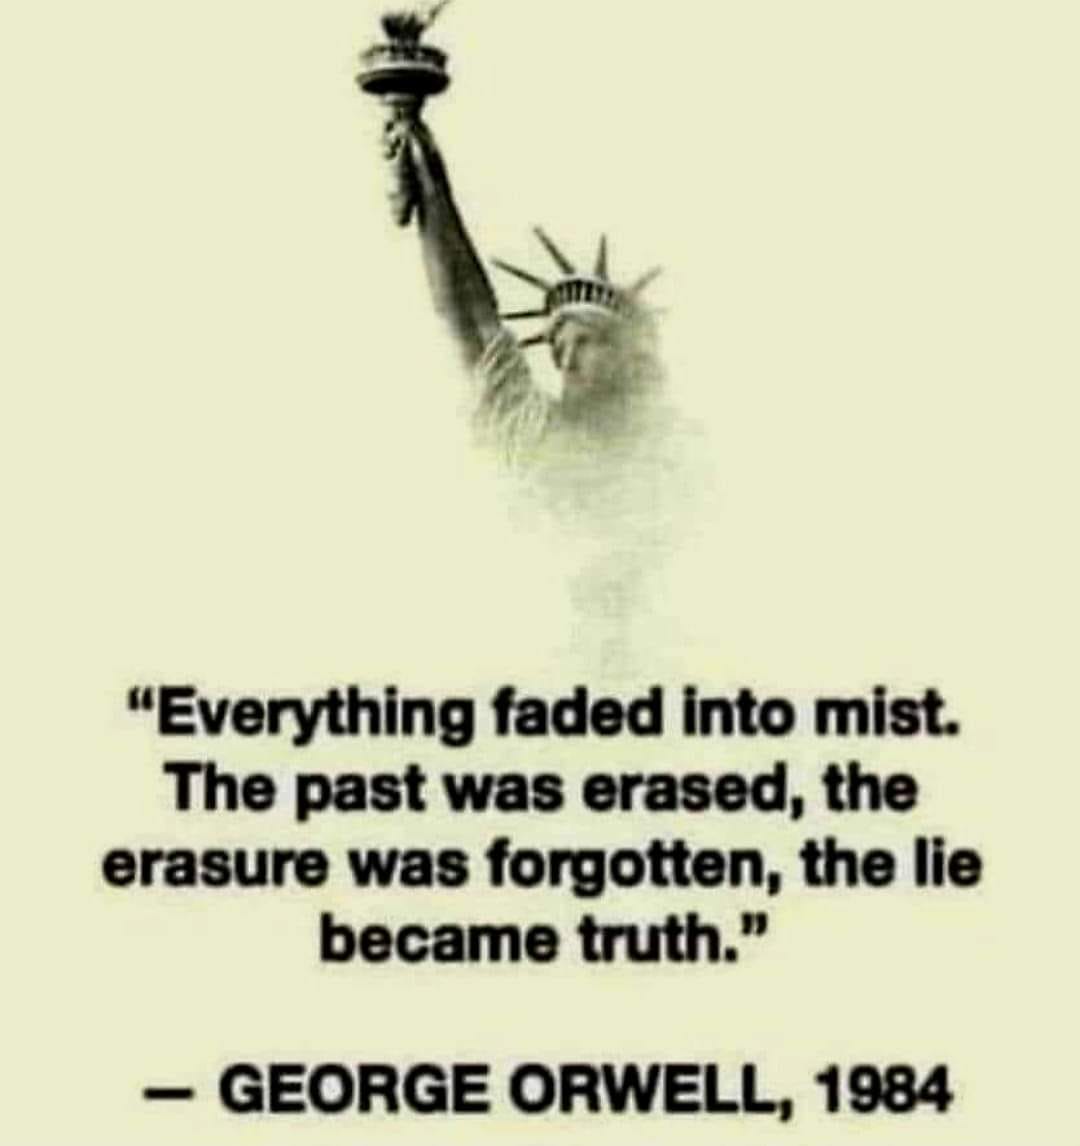 picture of a fading Statue of Liberty followed by George Orwelll quote 